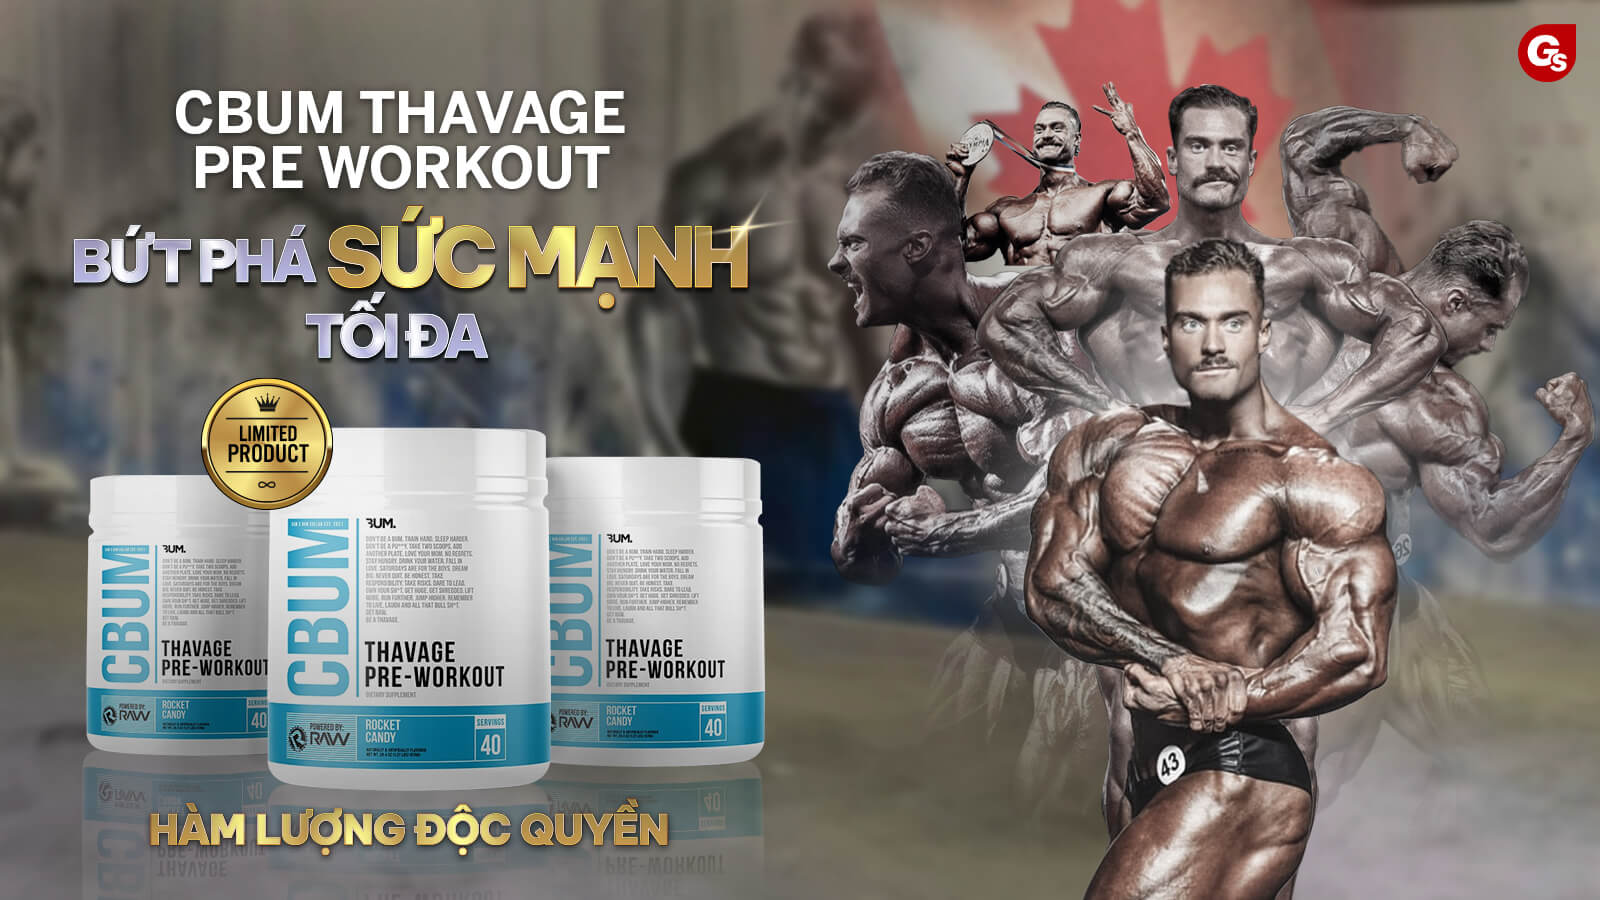 cbum-thavage-pre-workout-but-pha-suc-manh-gymstore